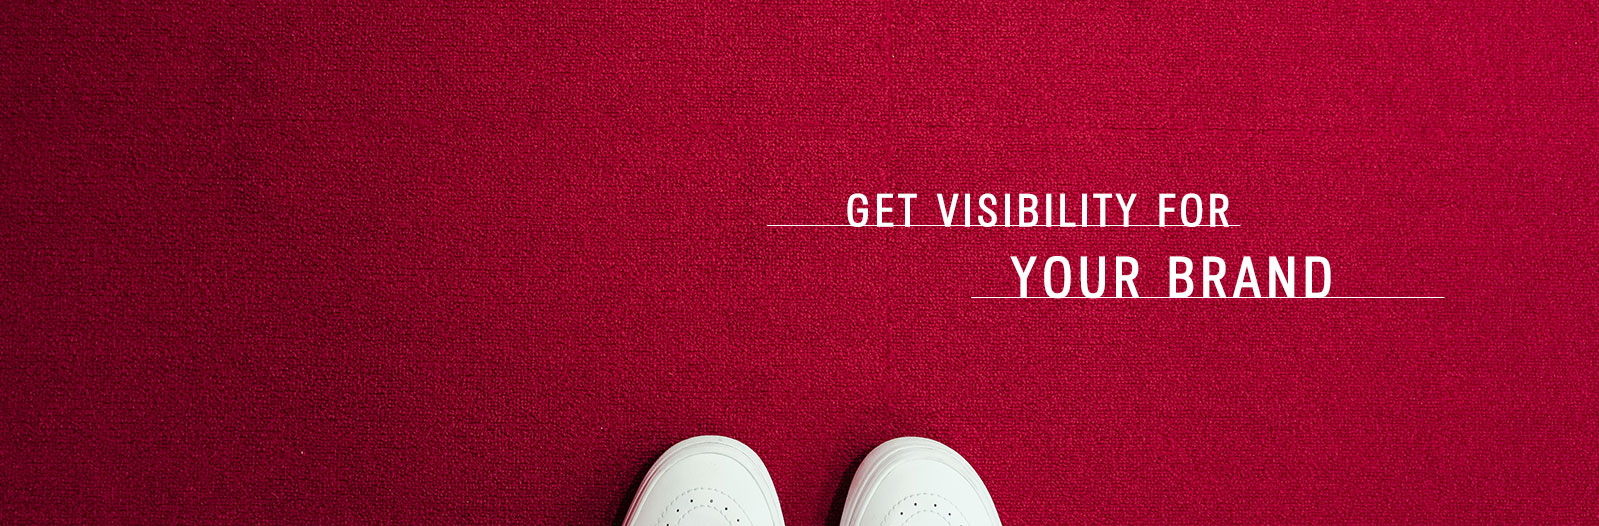 get_visibility-for-your-brand-space-sign-kerala